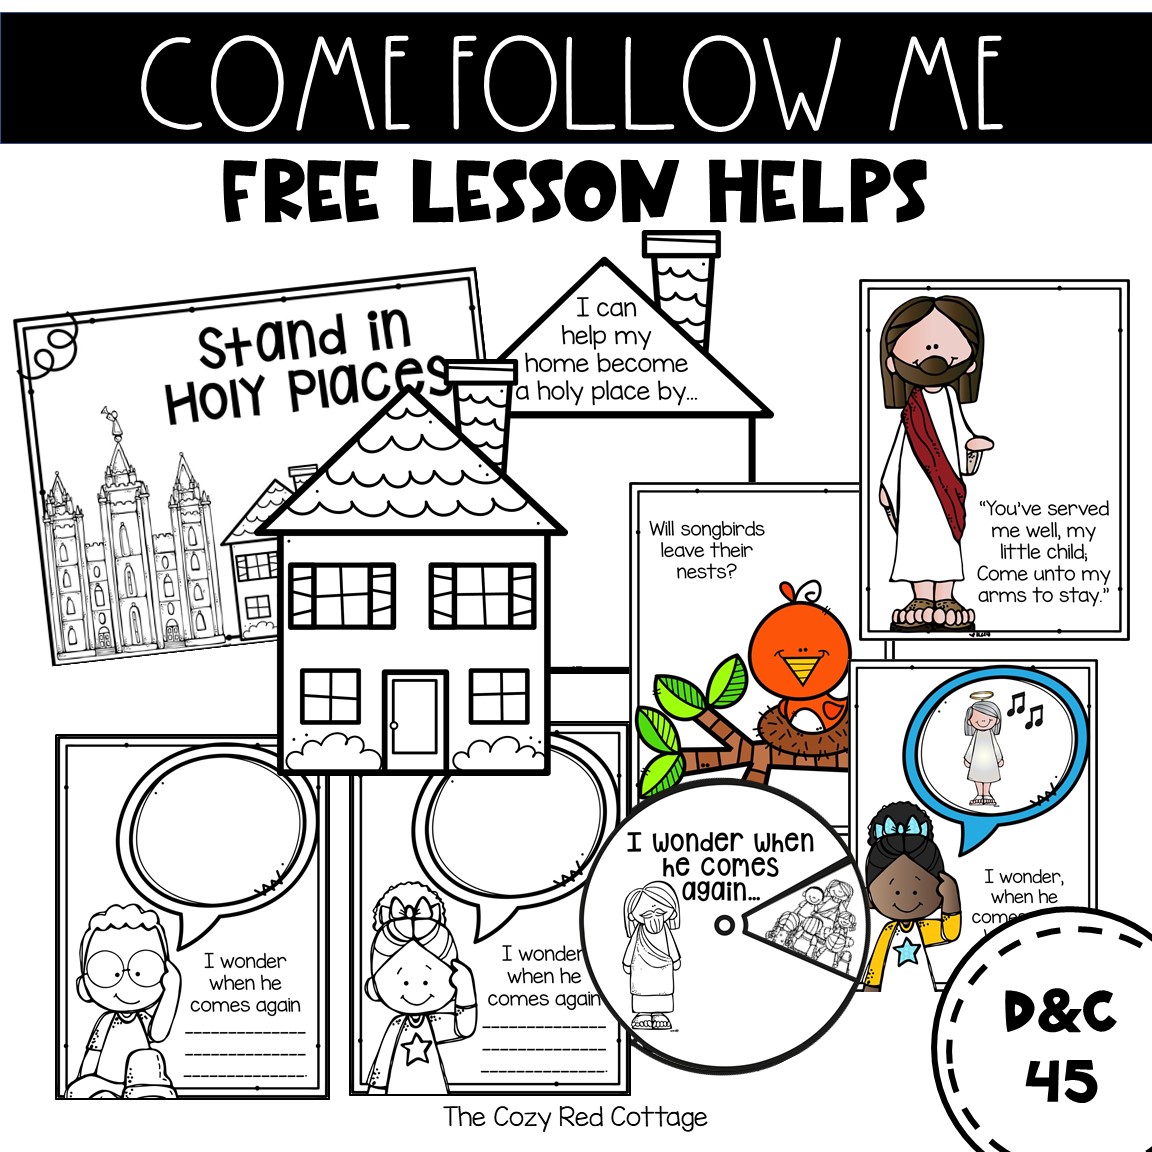 The Cozy Red Cottage Free Come Follow Me Lesson Helps D&C 45